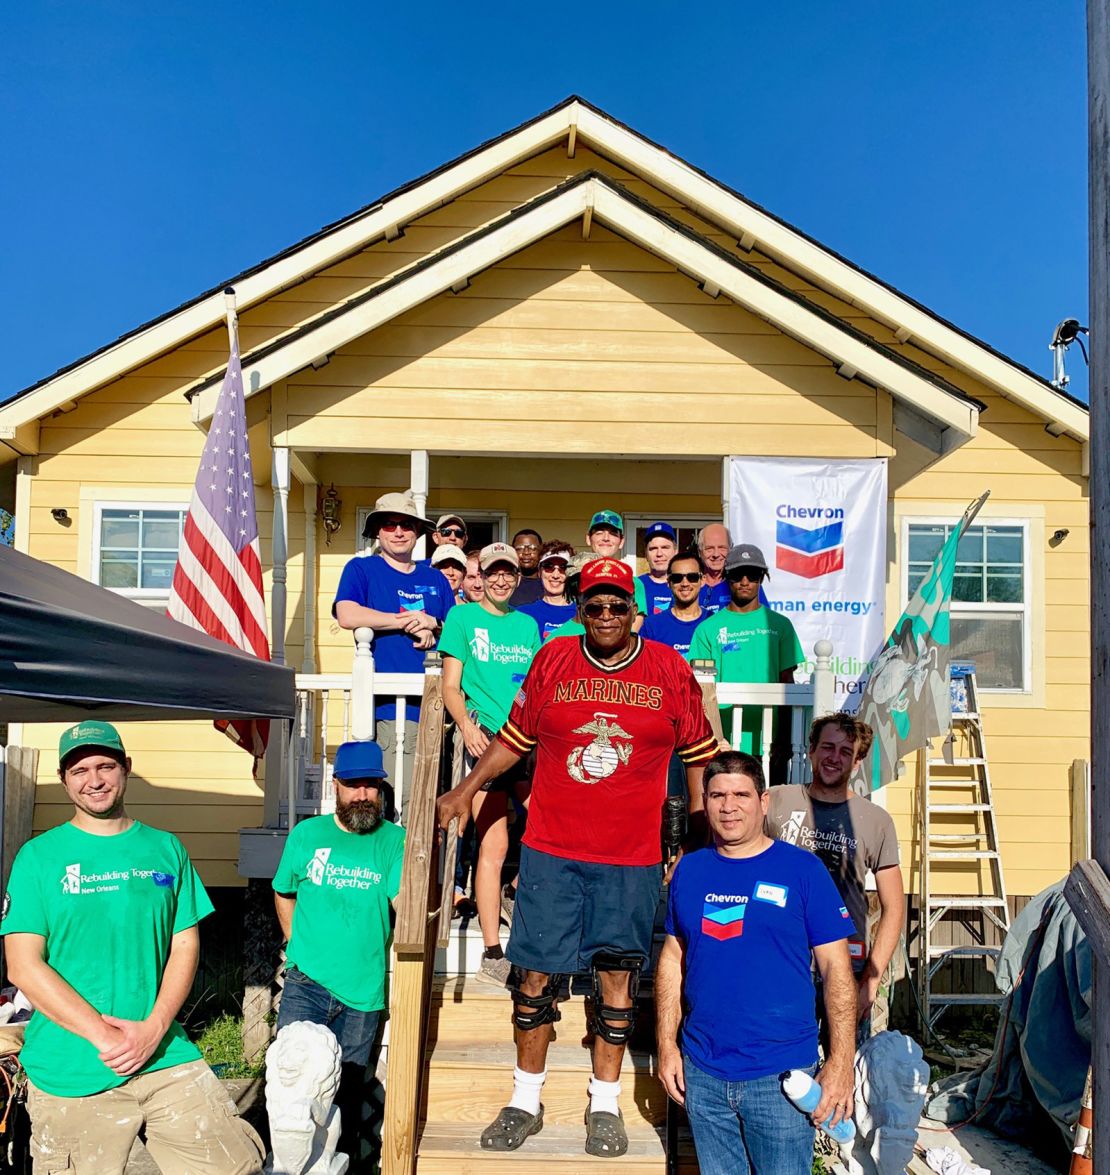 Felix Lewis, a Vietnam veteran, poses in front of his newly renovated home with volunteers from Chevon who helped complete the work.